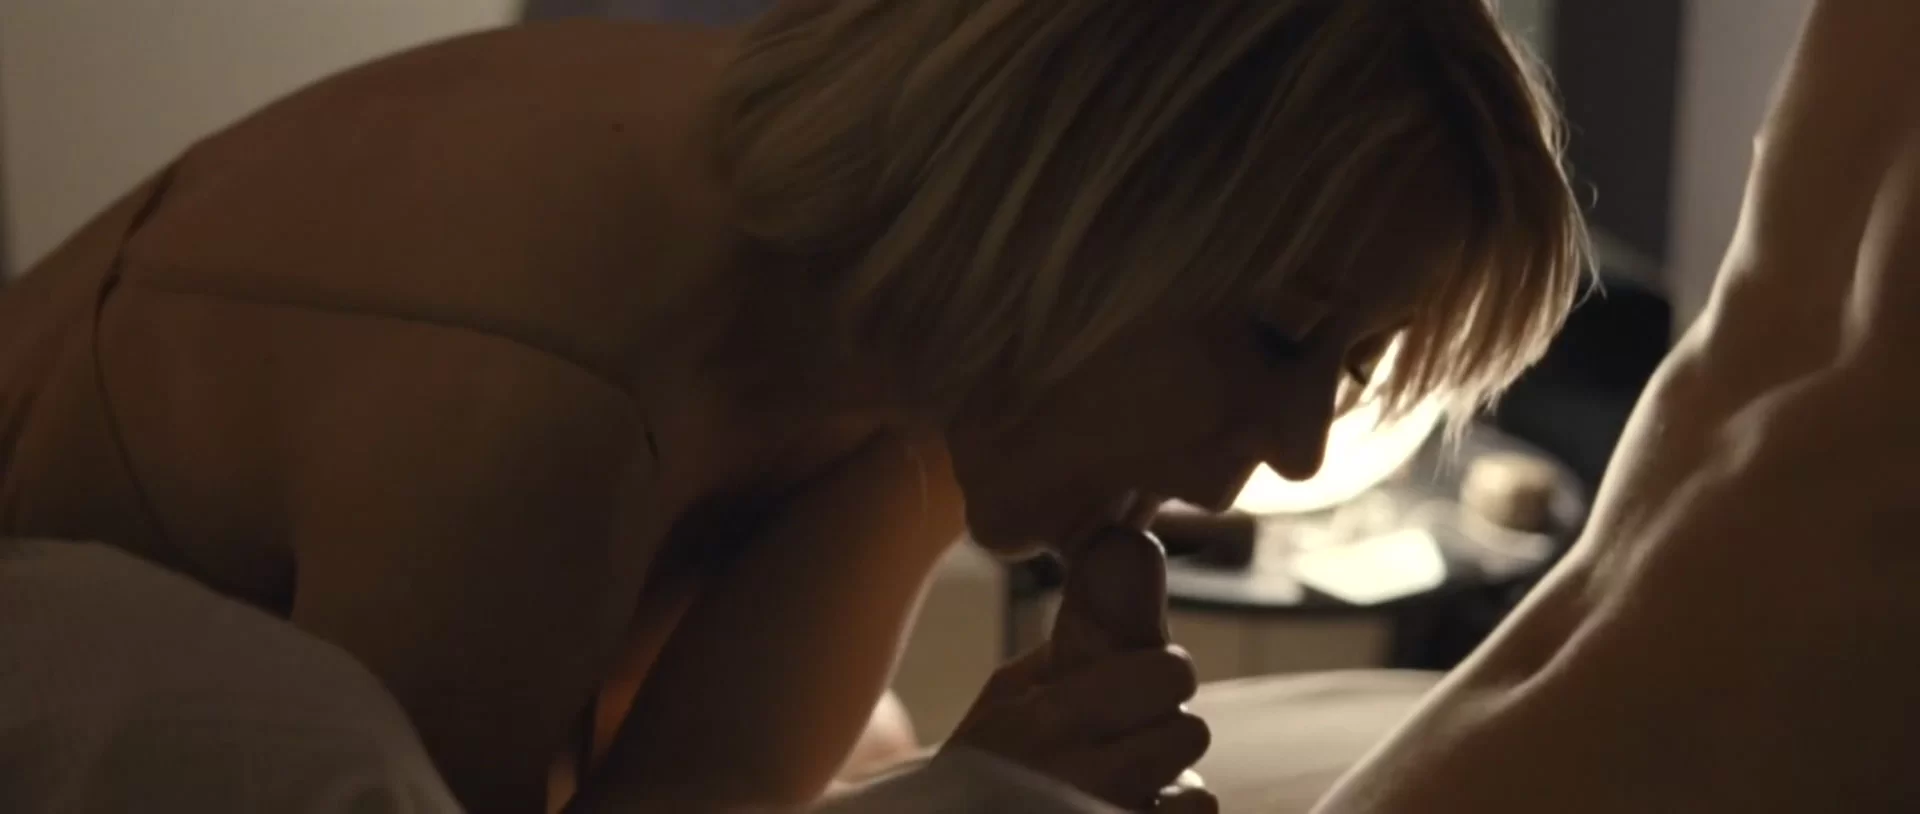 Trine Dyrholm - Queen of Hearts (2019, slow-mo) Porn Photo